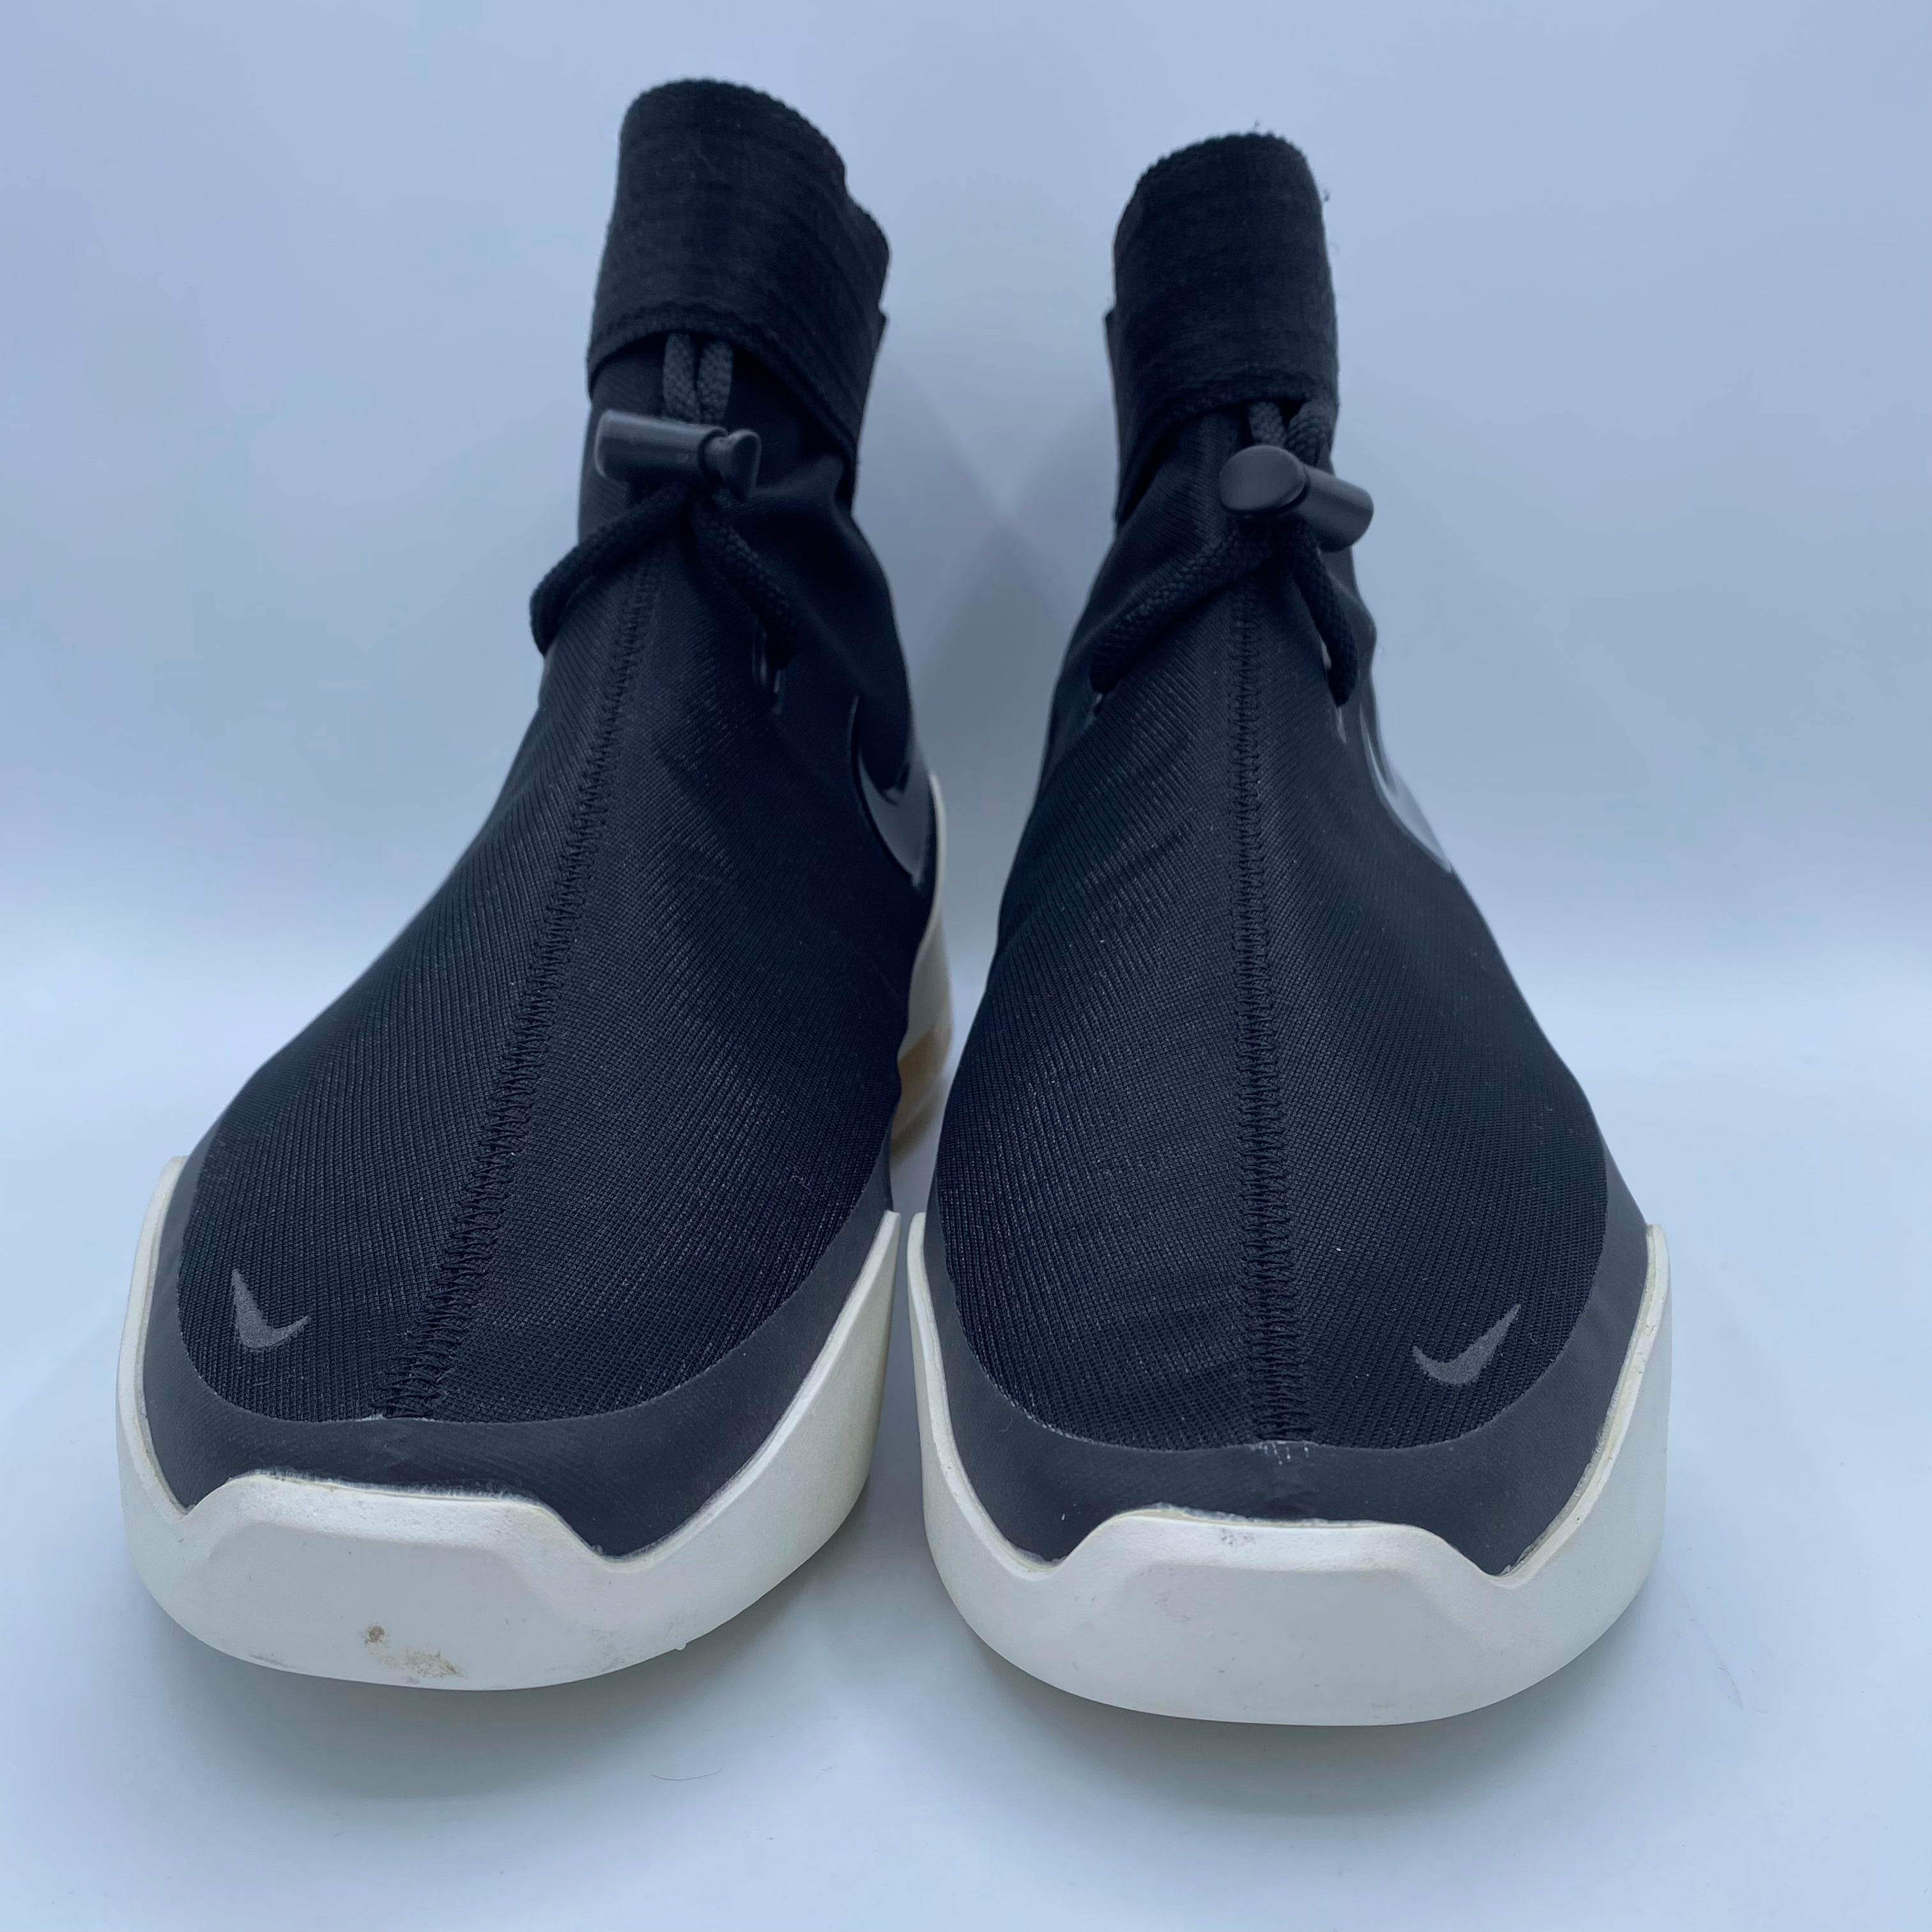 Nike Air Fear of God Shoot-Around Black (Worn Once) – Utopia Shop